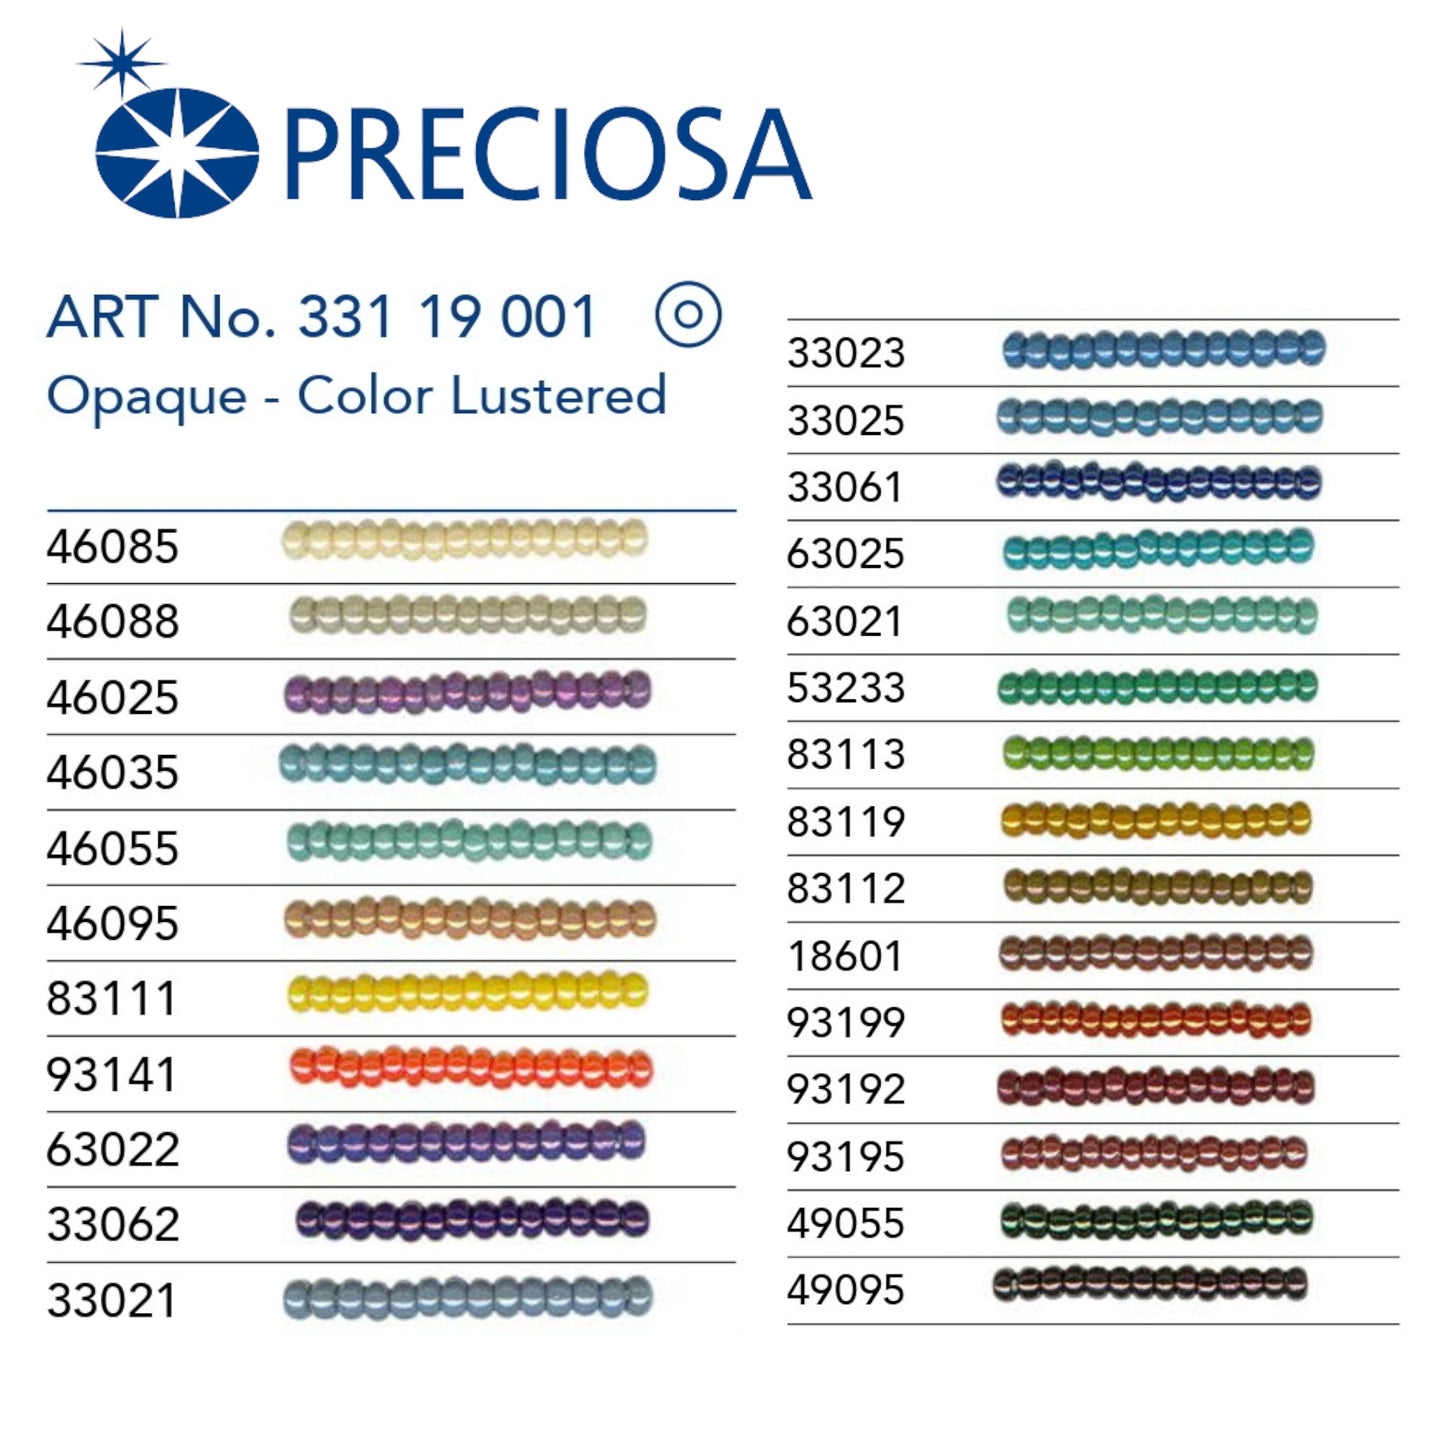 46088 Czech Seed Beads Preciosa Rocailes Opaque - Color Lustered - VadymShop